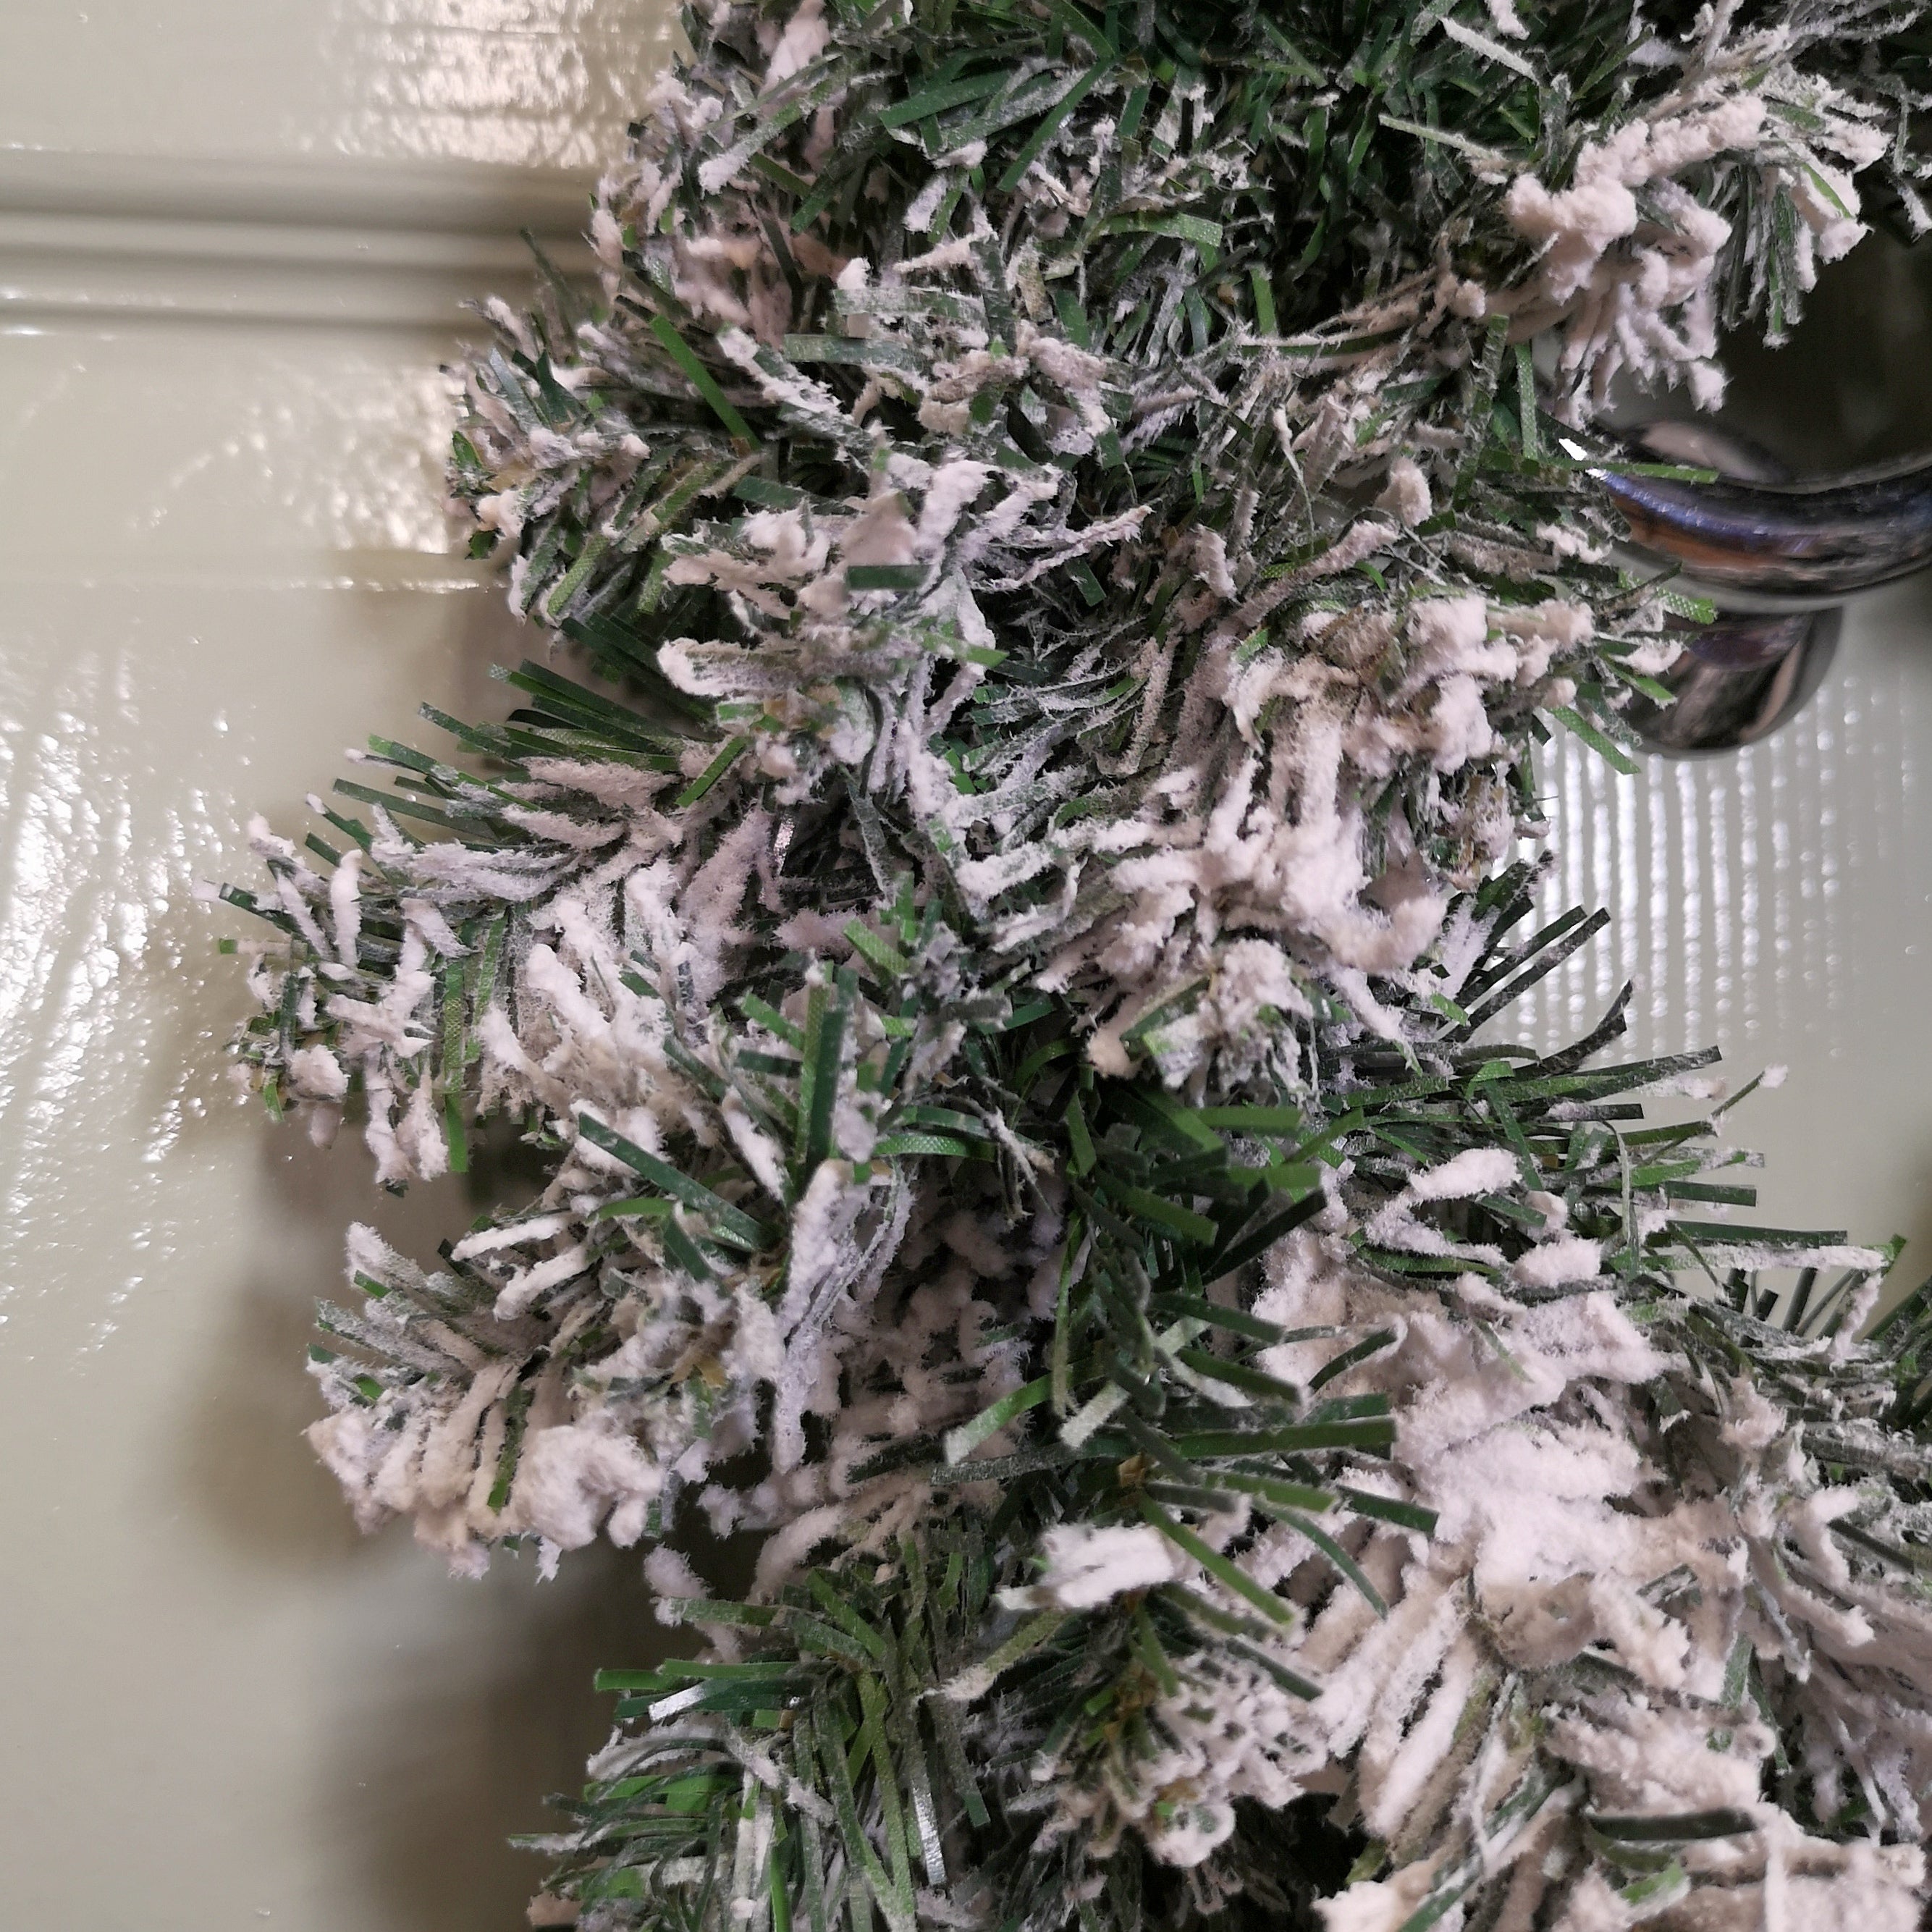 30cm Snow Flocked Imperial Christmas Wreath with 70 Tips